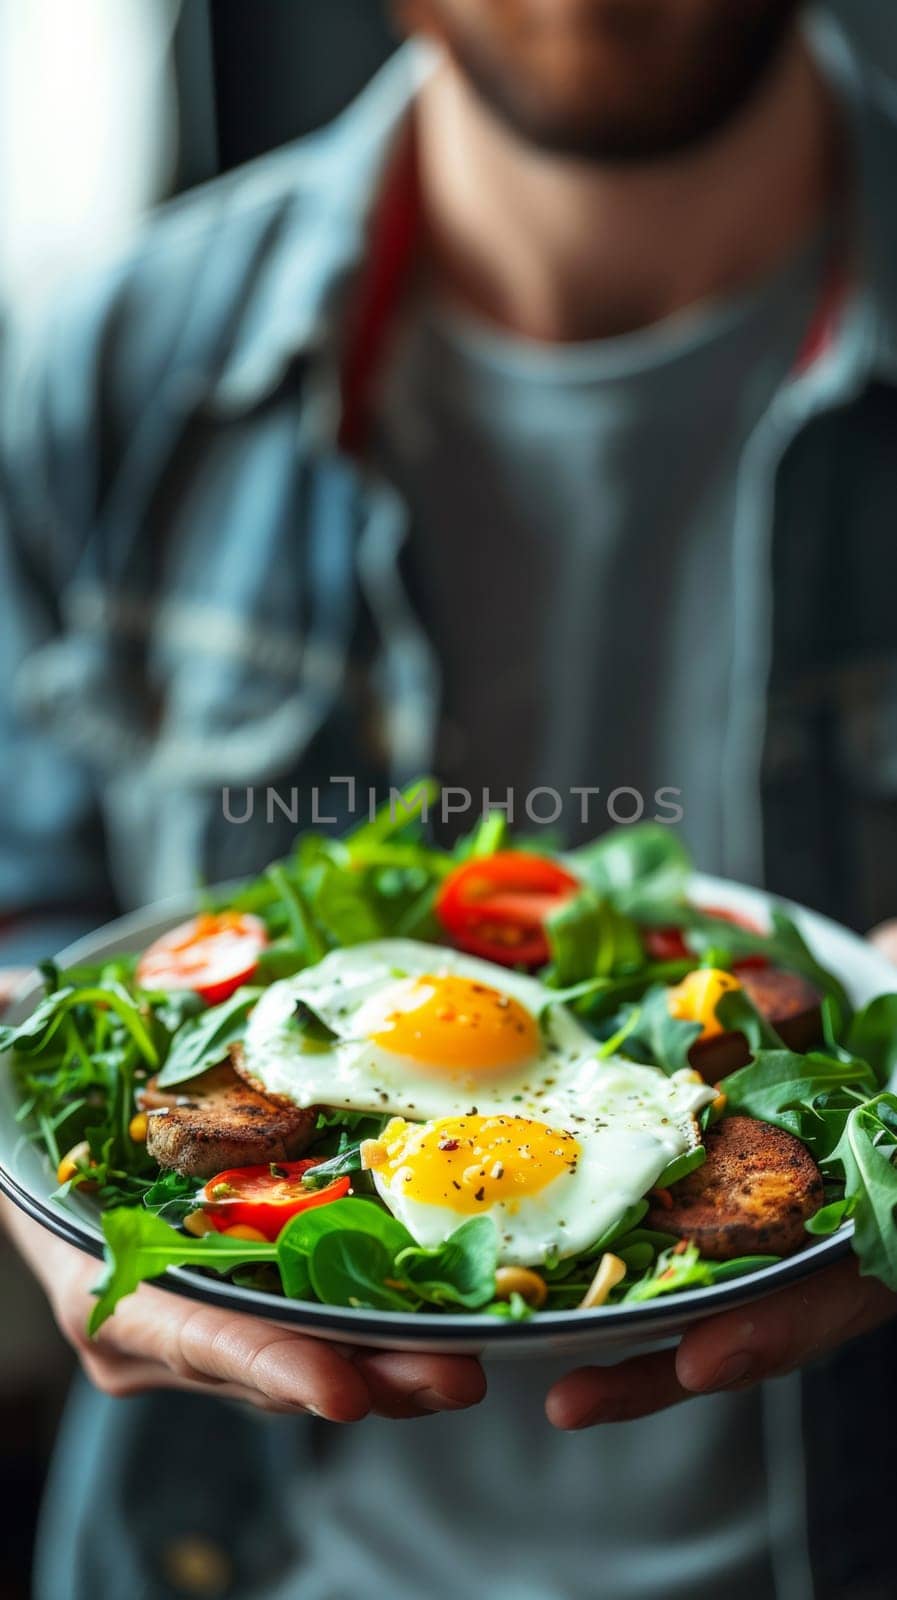 A man holding a plate of food with eggs and vegetables